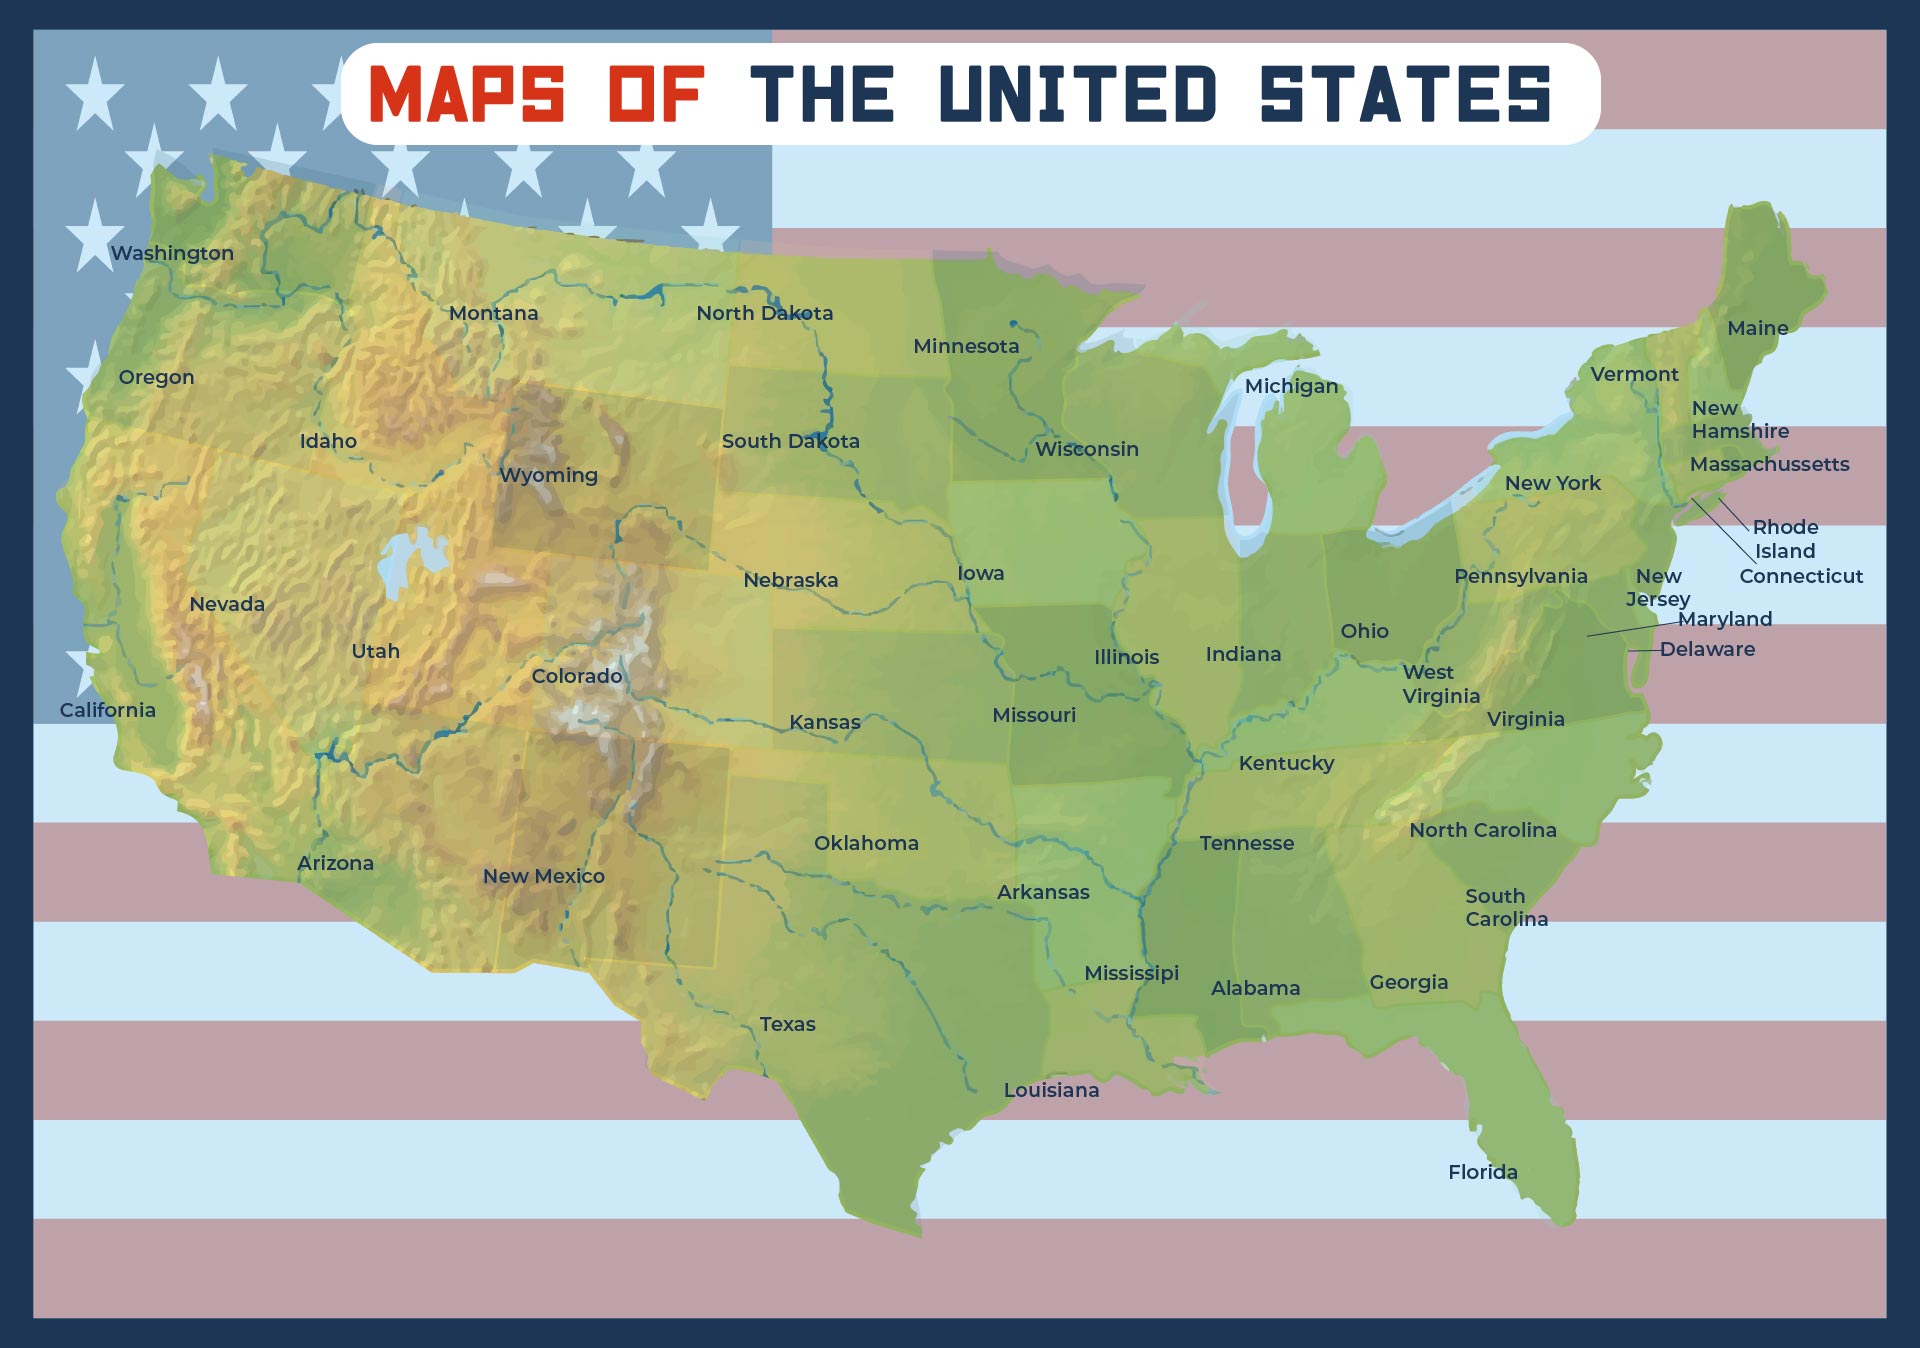 United States Of America Physical Features Map